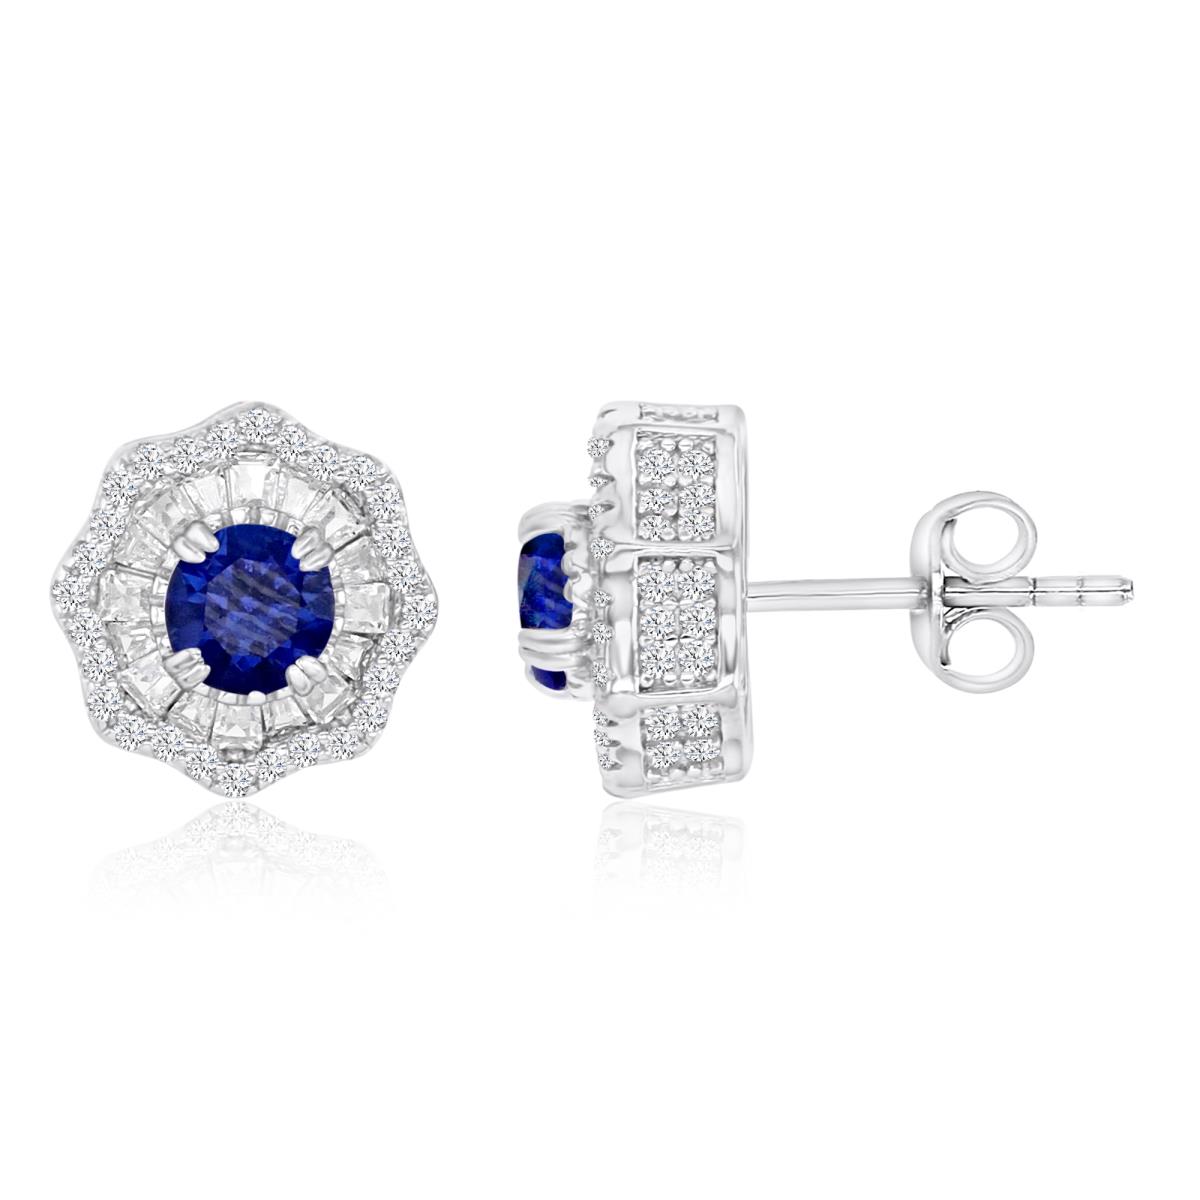 Sterling Silver Rhodium 11MM Polished Cr Blue & Cr White Sapphire Octagon Flower Stud Earrings